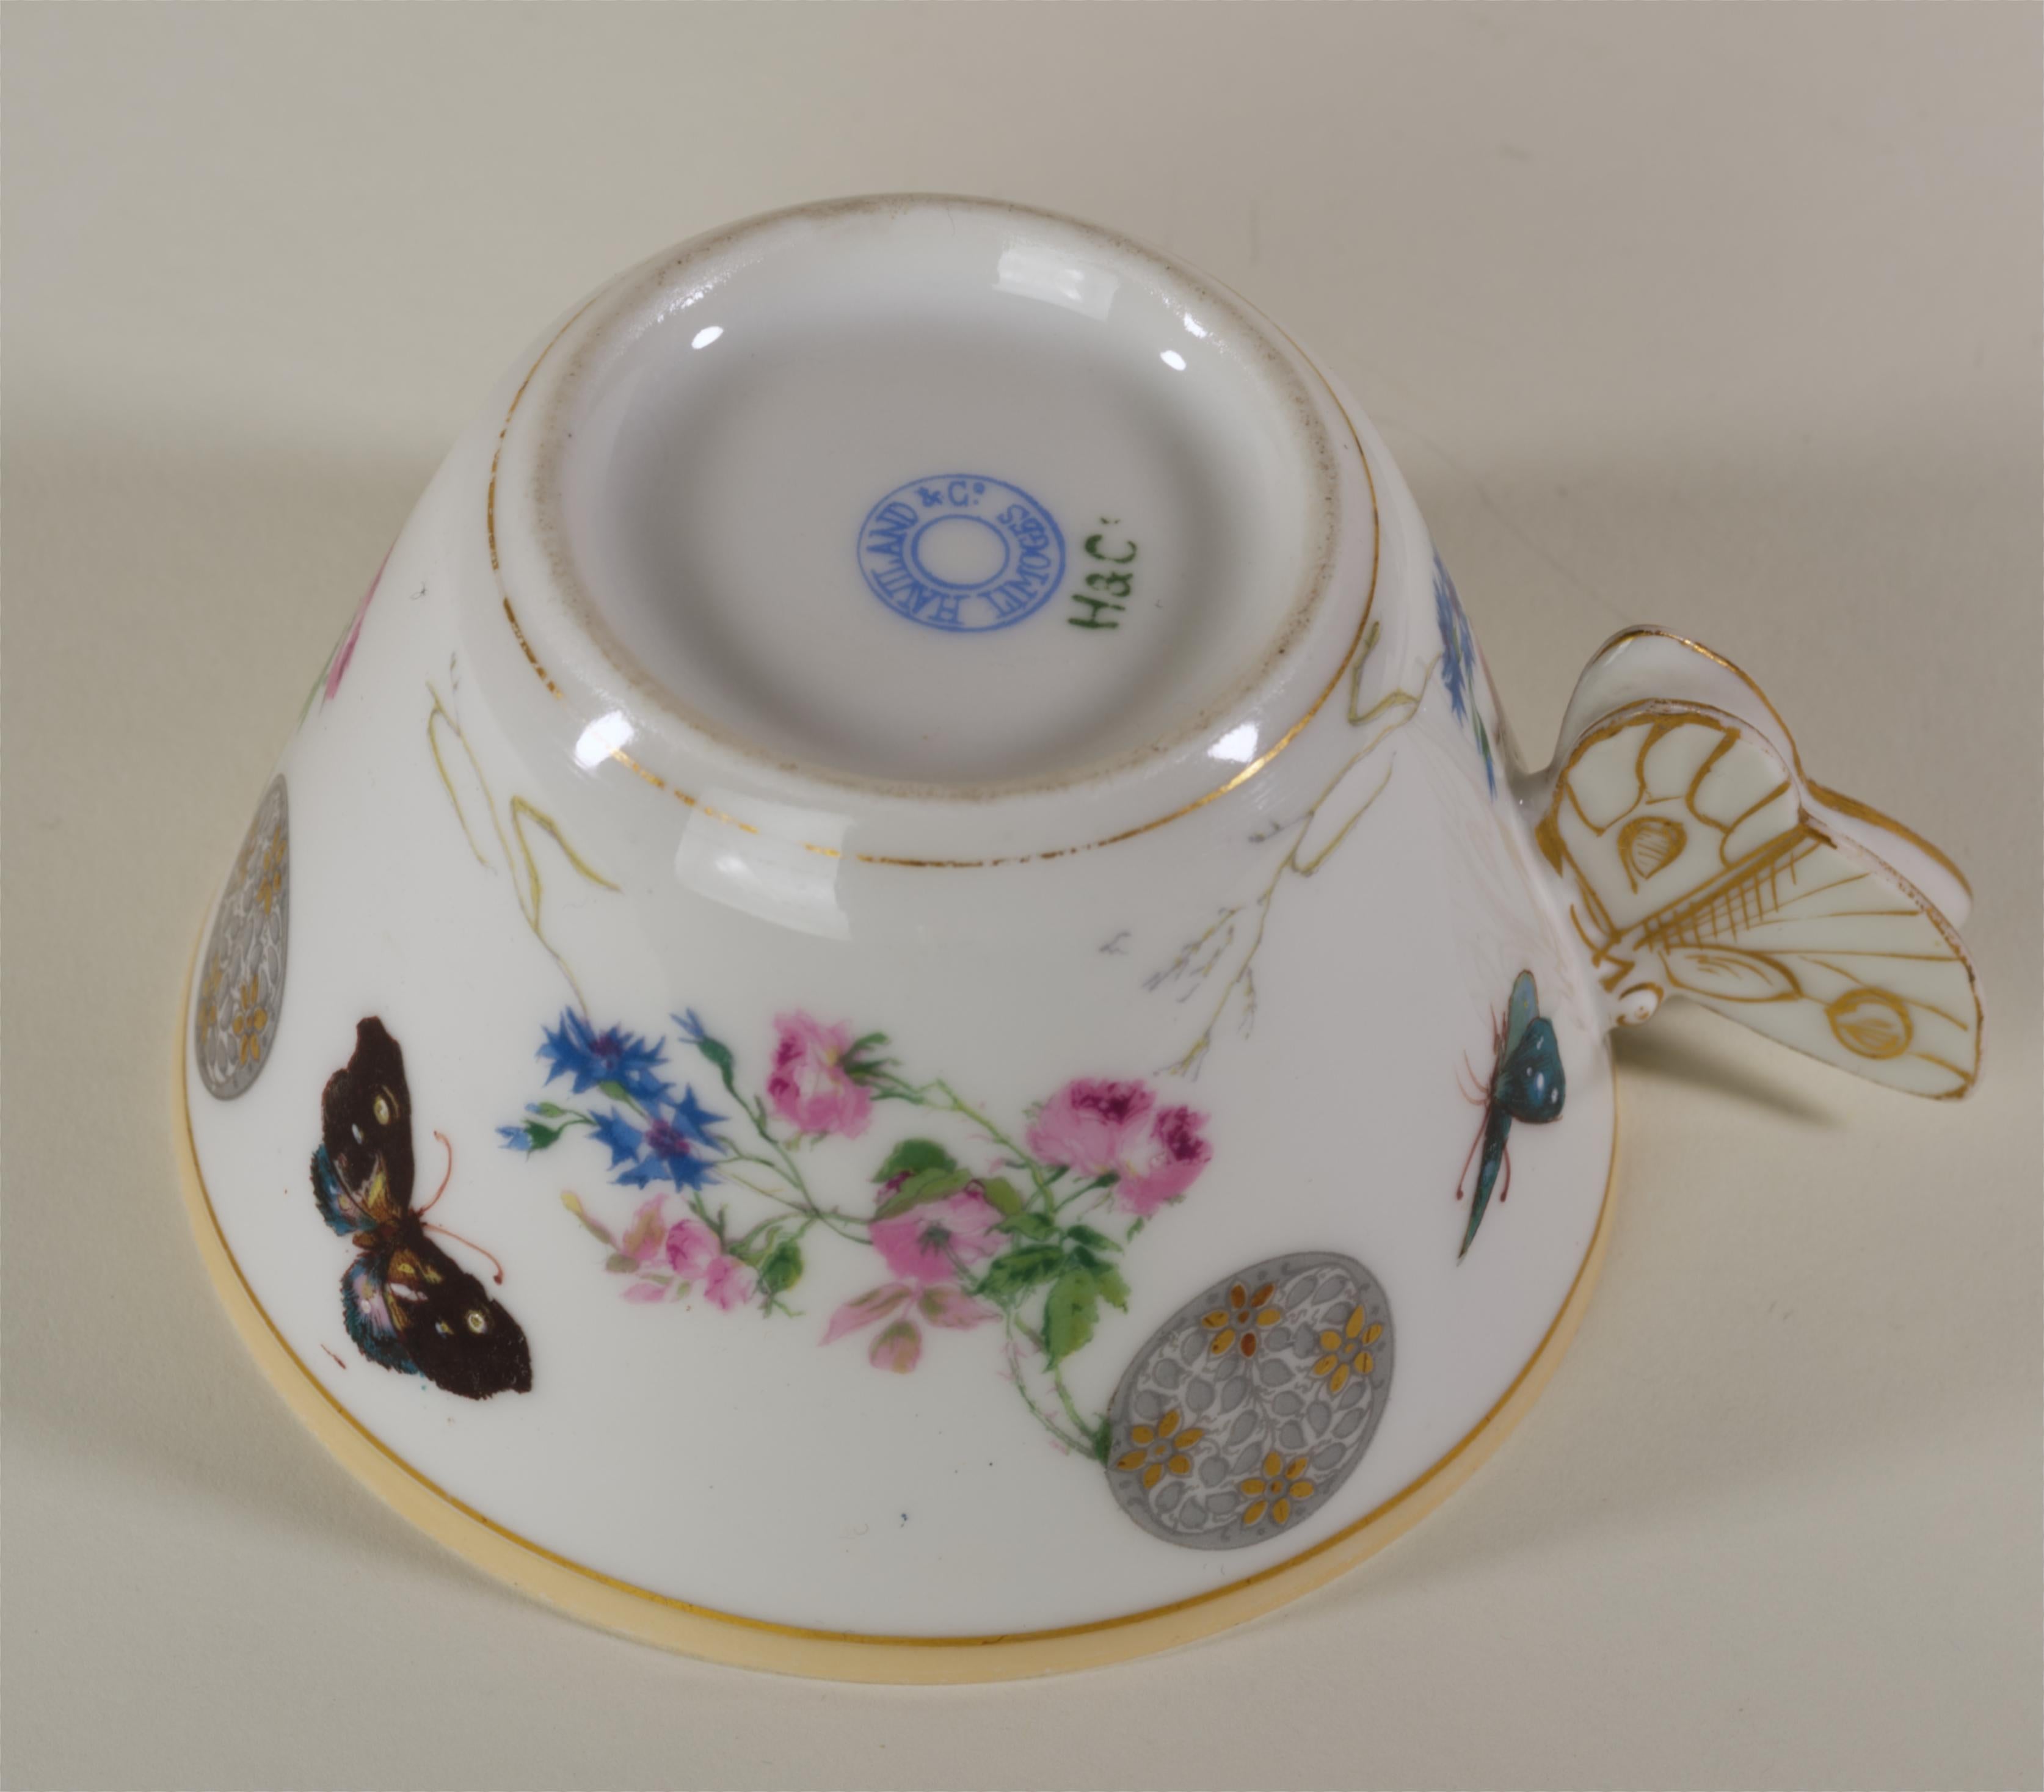 Haviland Limoges Butterfly Handled Cup and saucer set, 1879-1889, Aesthetic  For Sale 5